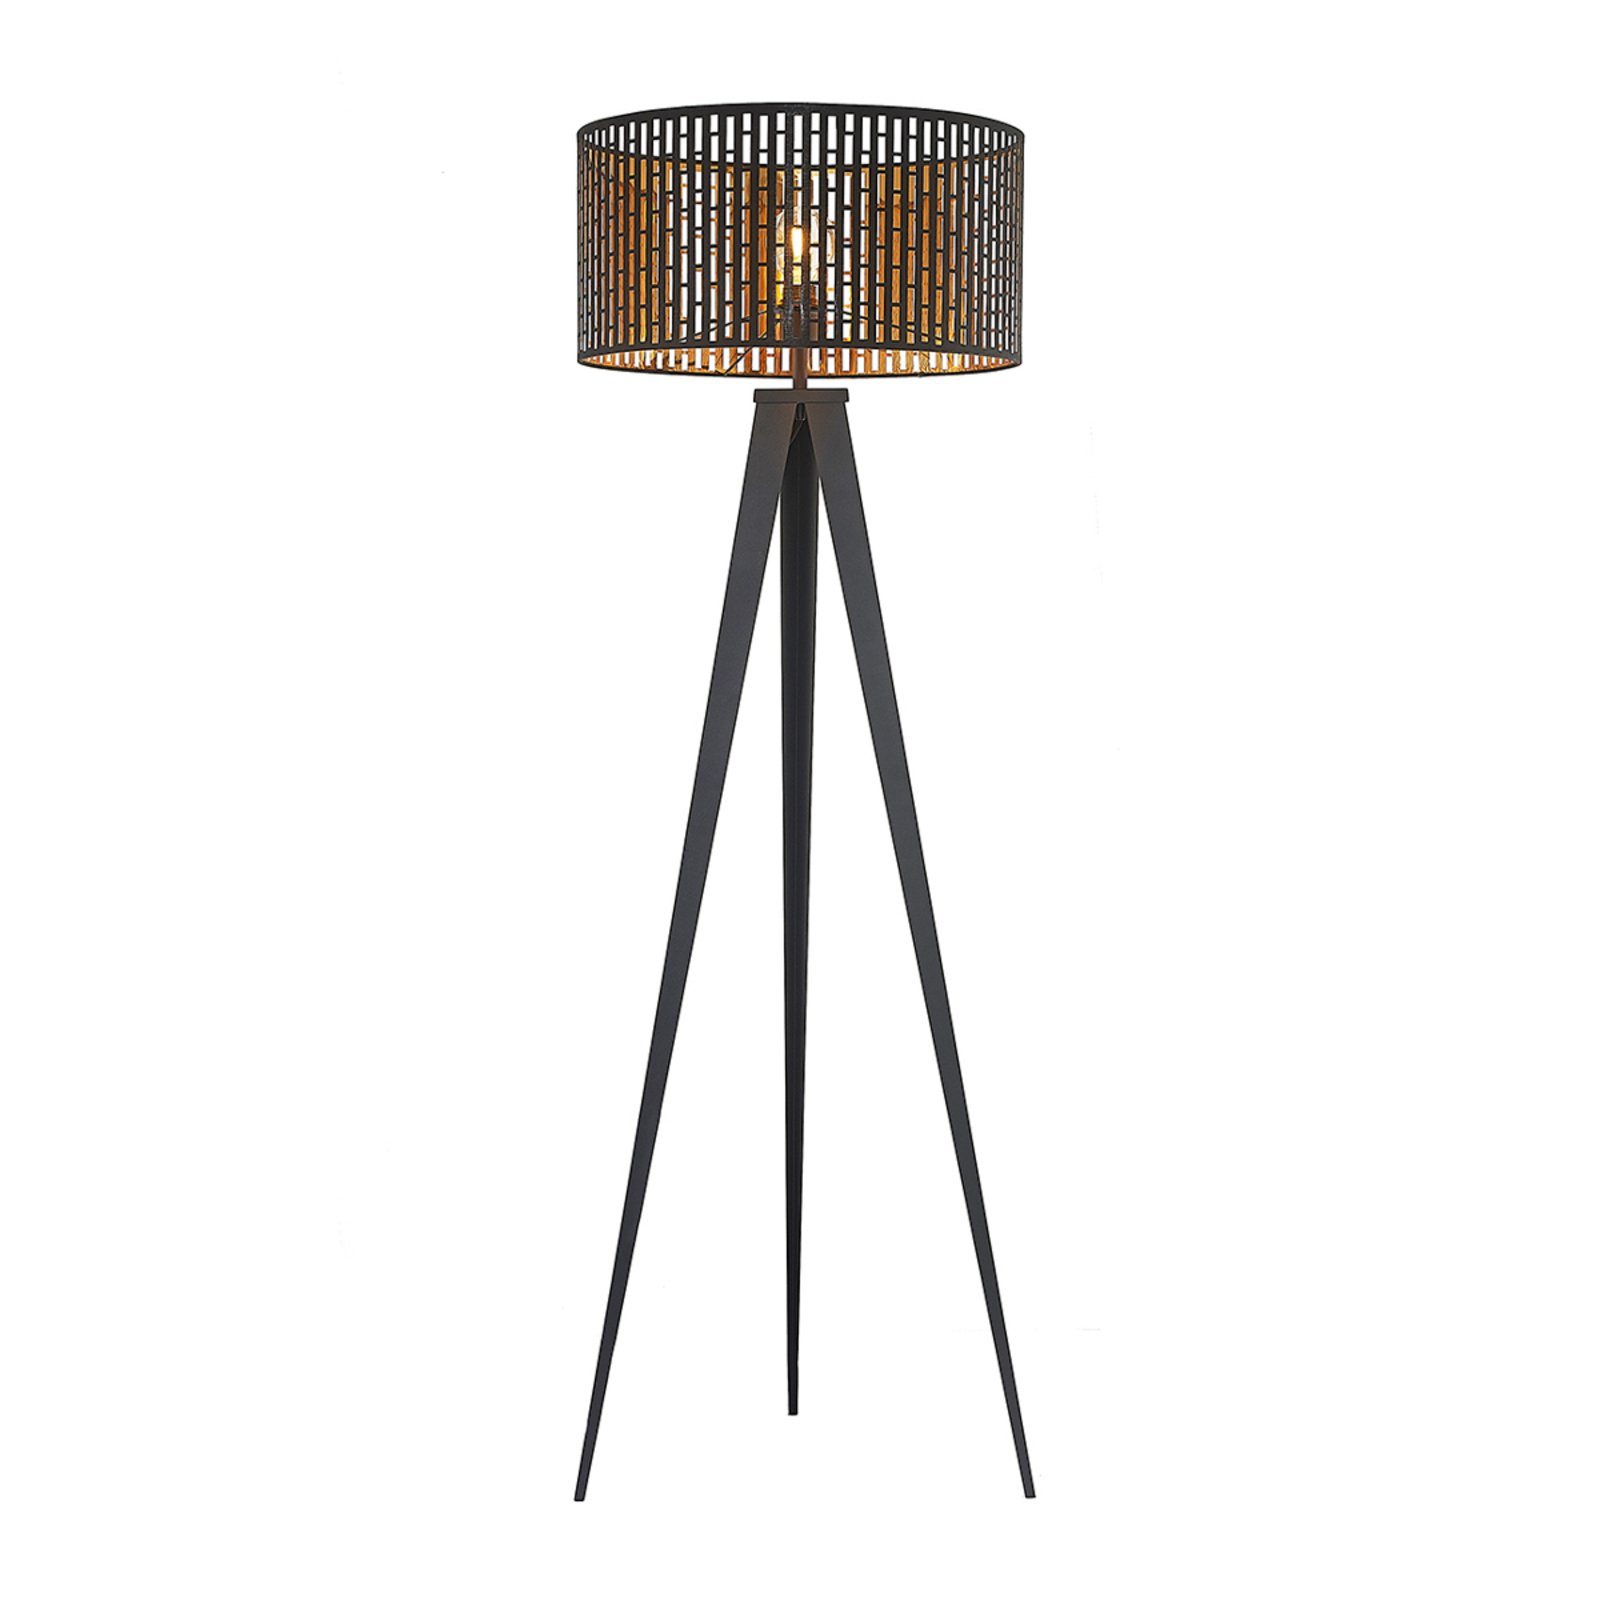 Lindby Thoralf floor lamp with a tripod frame